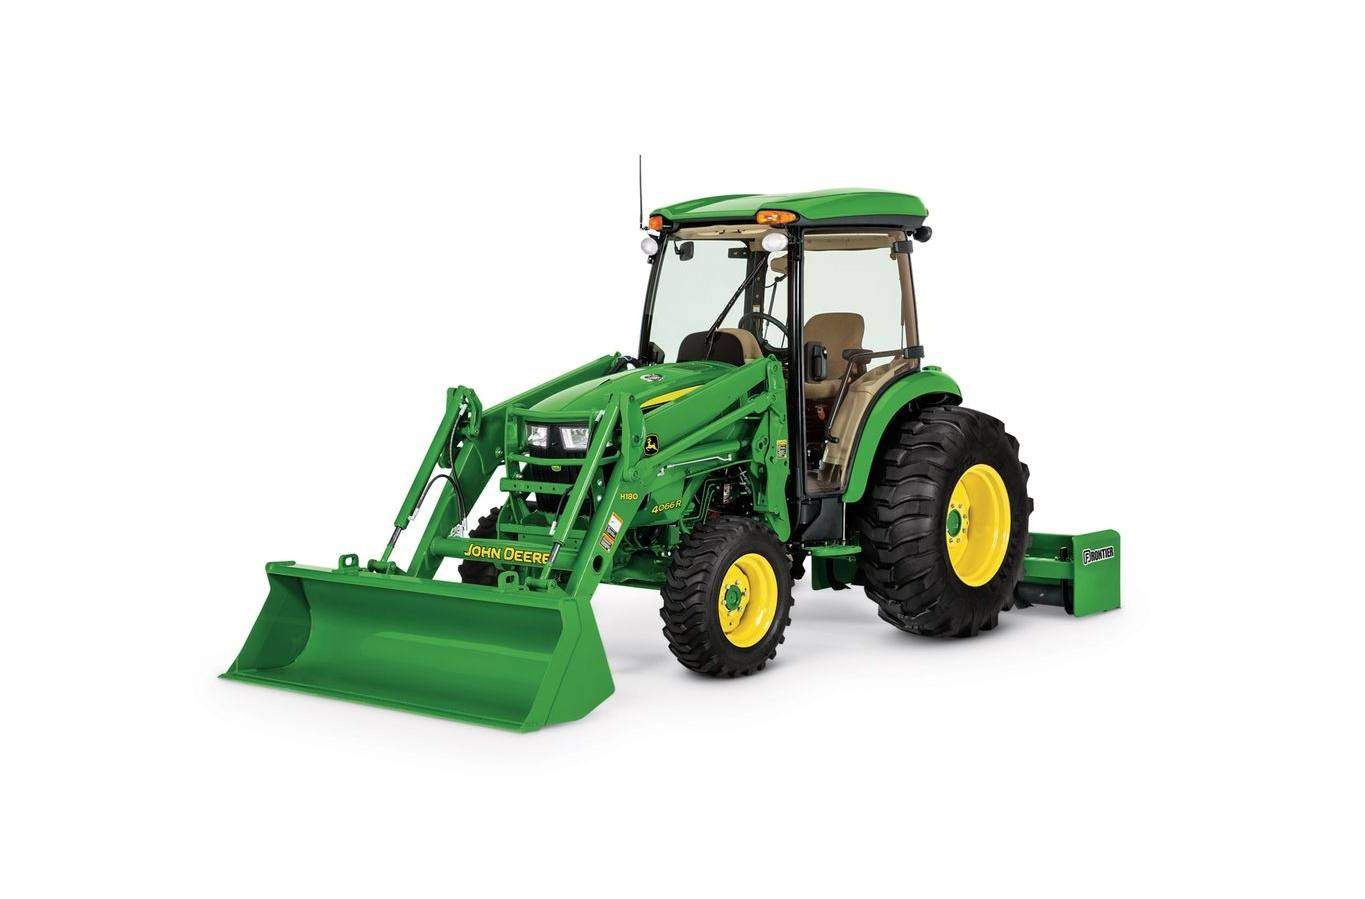 John Deere Compact Utility Equipment: Compact Power for Israeli Projects